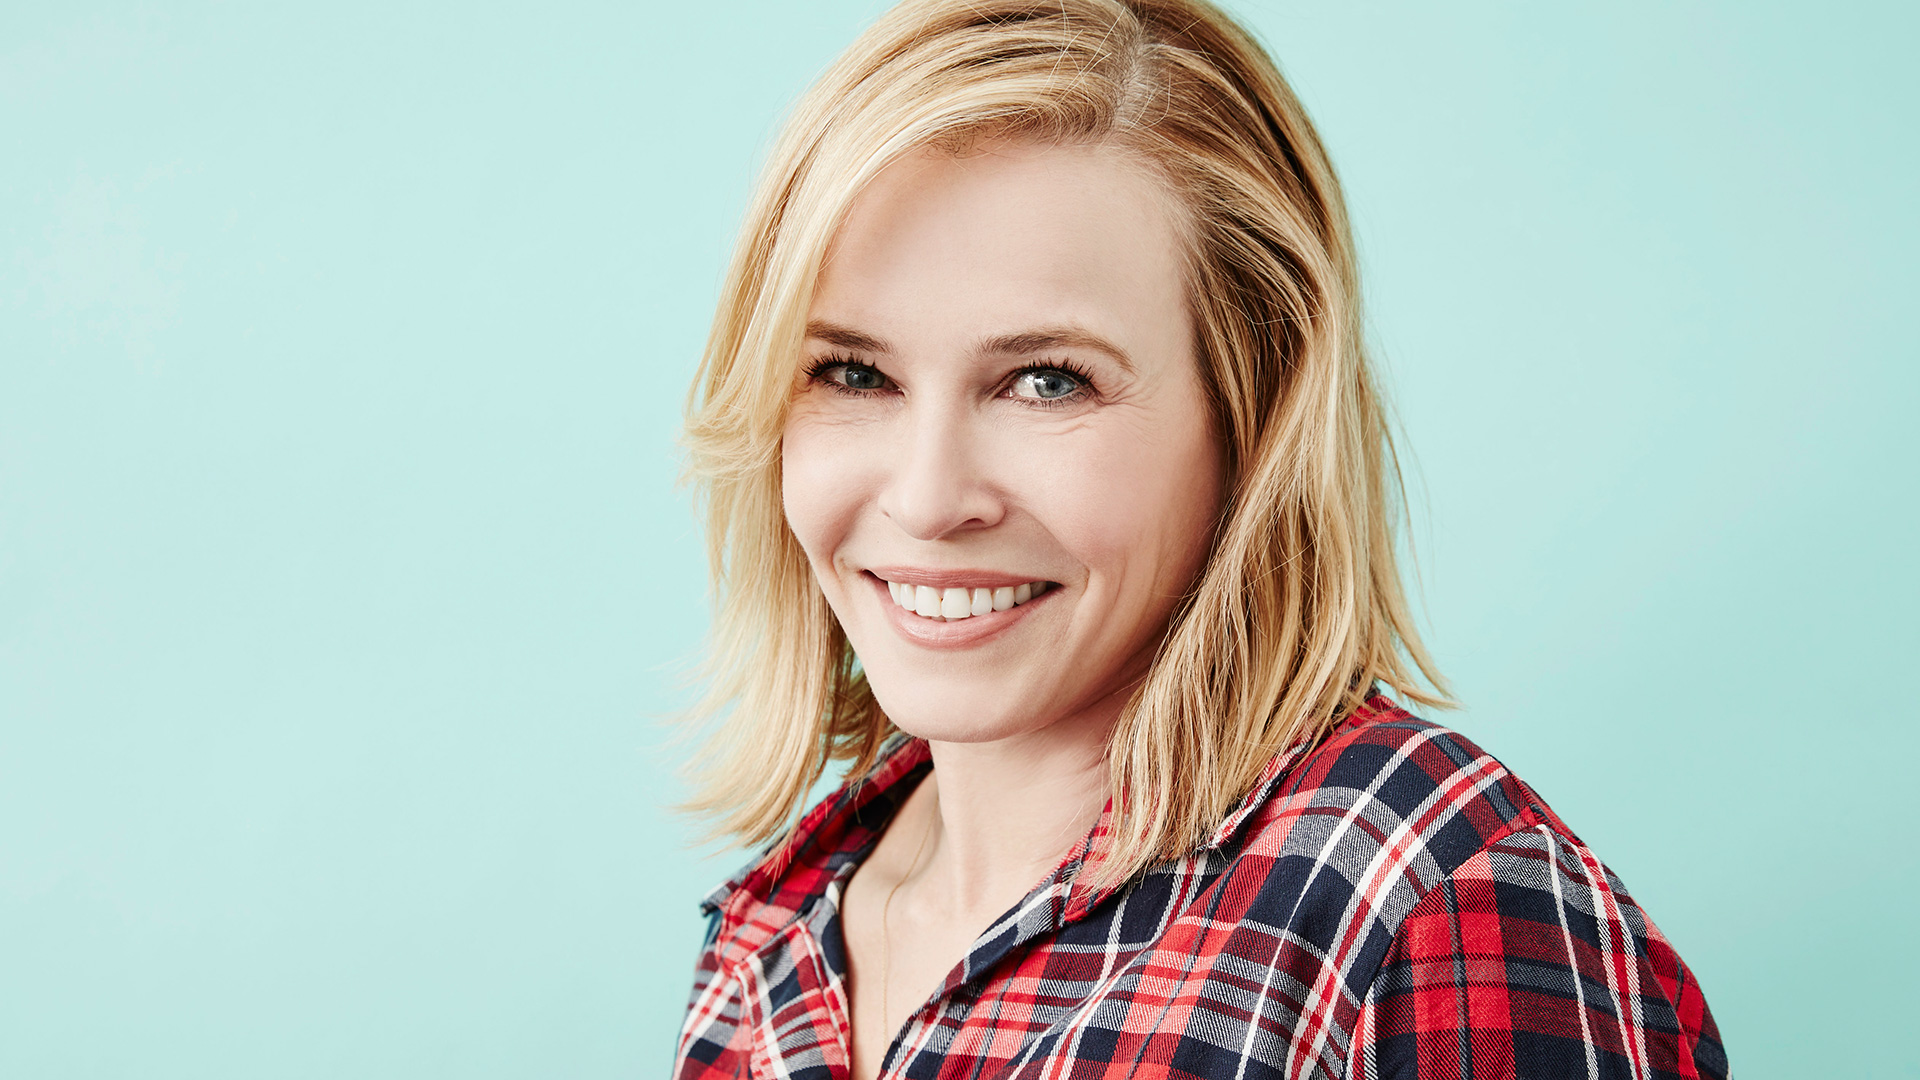 February 25, 1975: Comedian and Activist Chelsea Handler Was Born